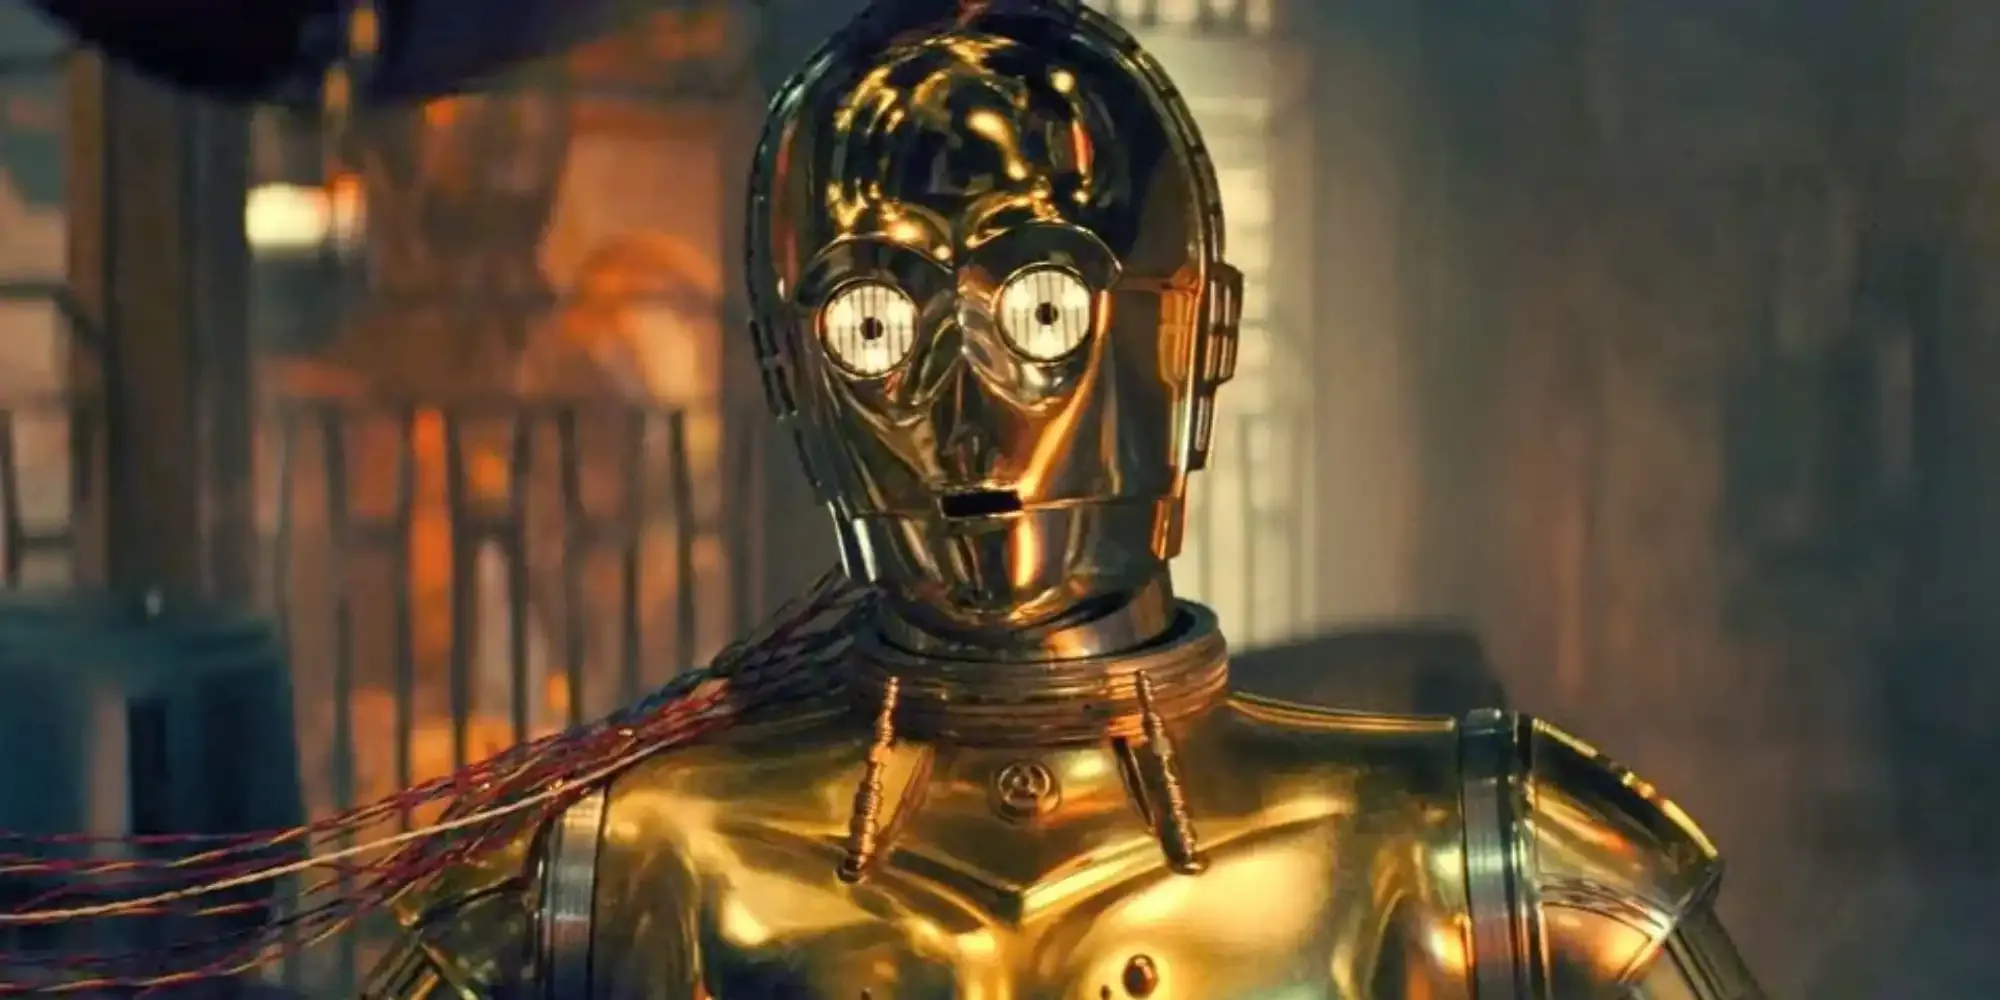 Star Wars- C-3PO with wires